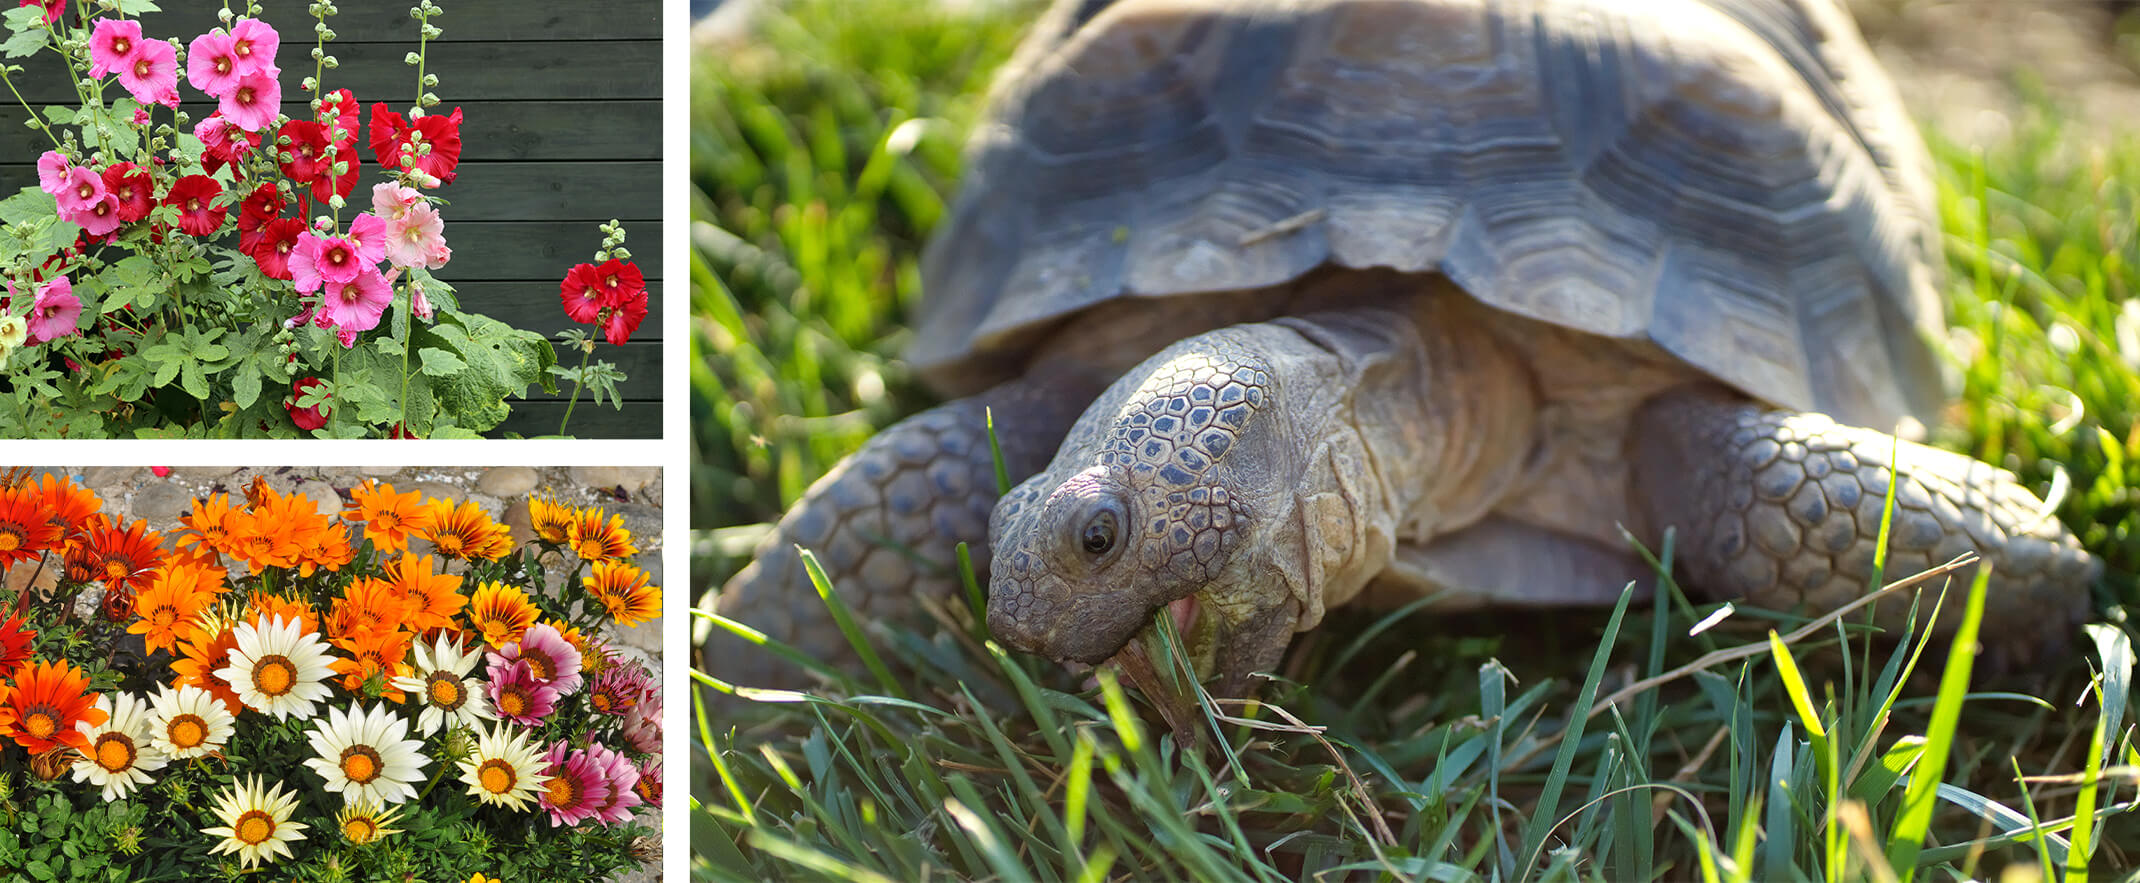 3 images: pink and red hollyhock flowers, orange and white gazania flowers, and a Desert Tortoise eating grass